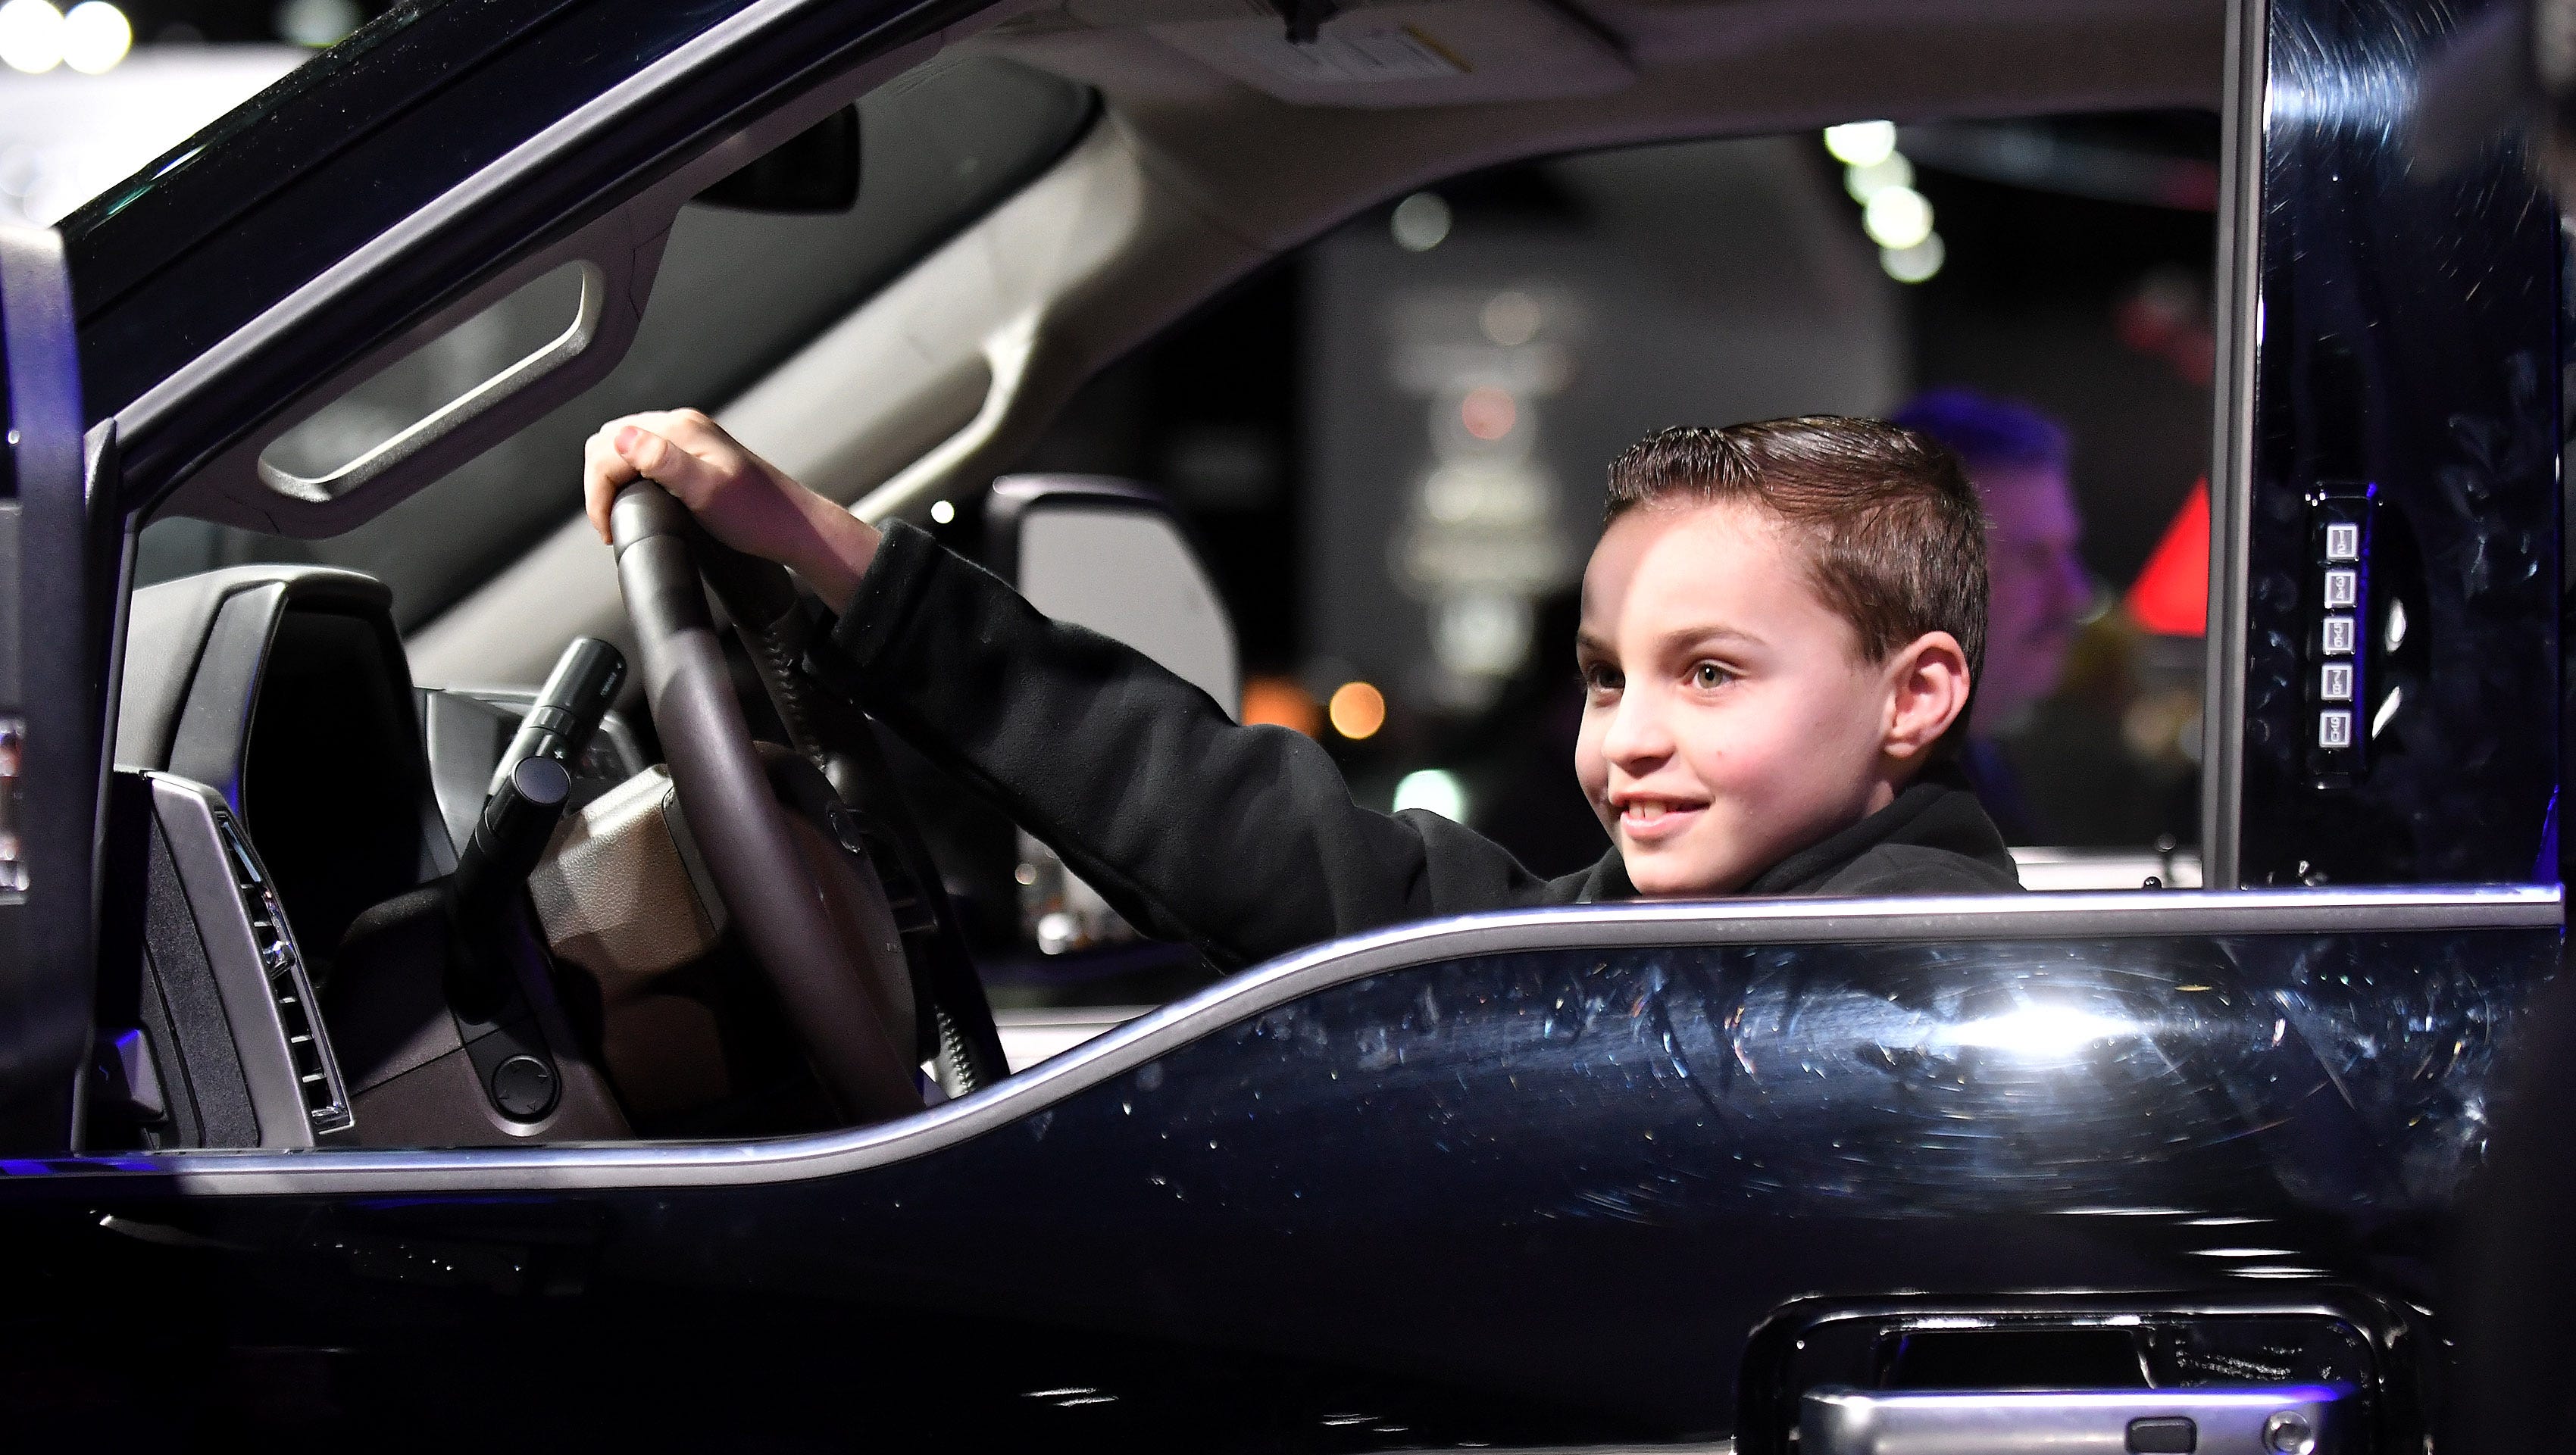 Anthony Ballarin, 8, of South Lyon sits in the Ford F-450 superduty truck while his dad, Wayne Ballarin, takes a photo.